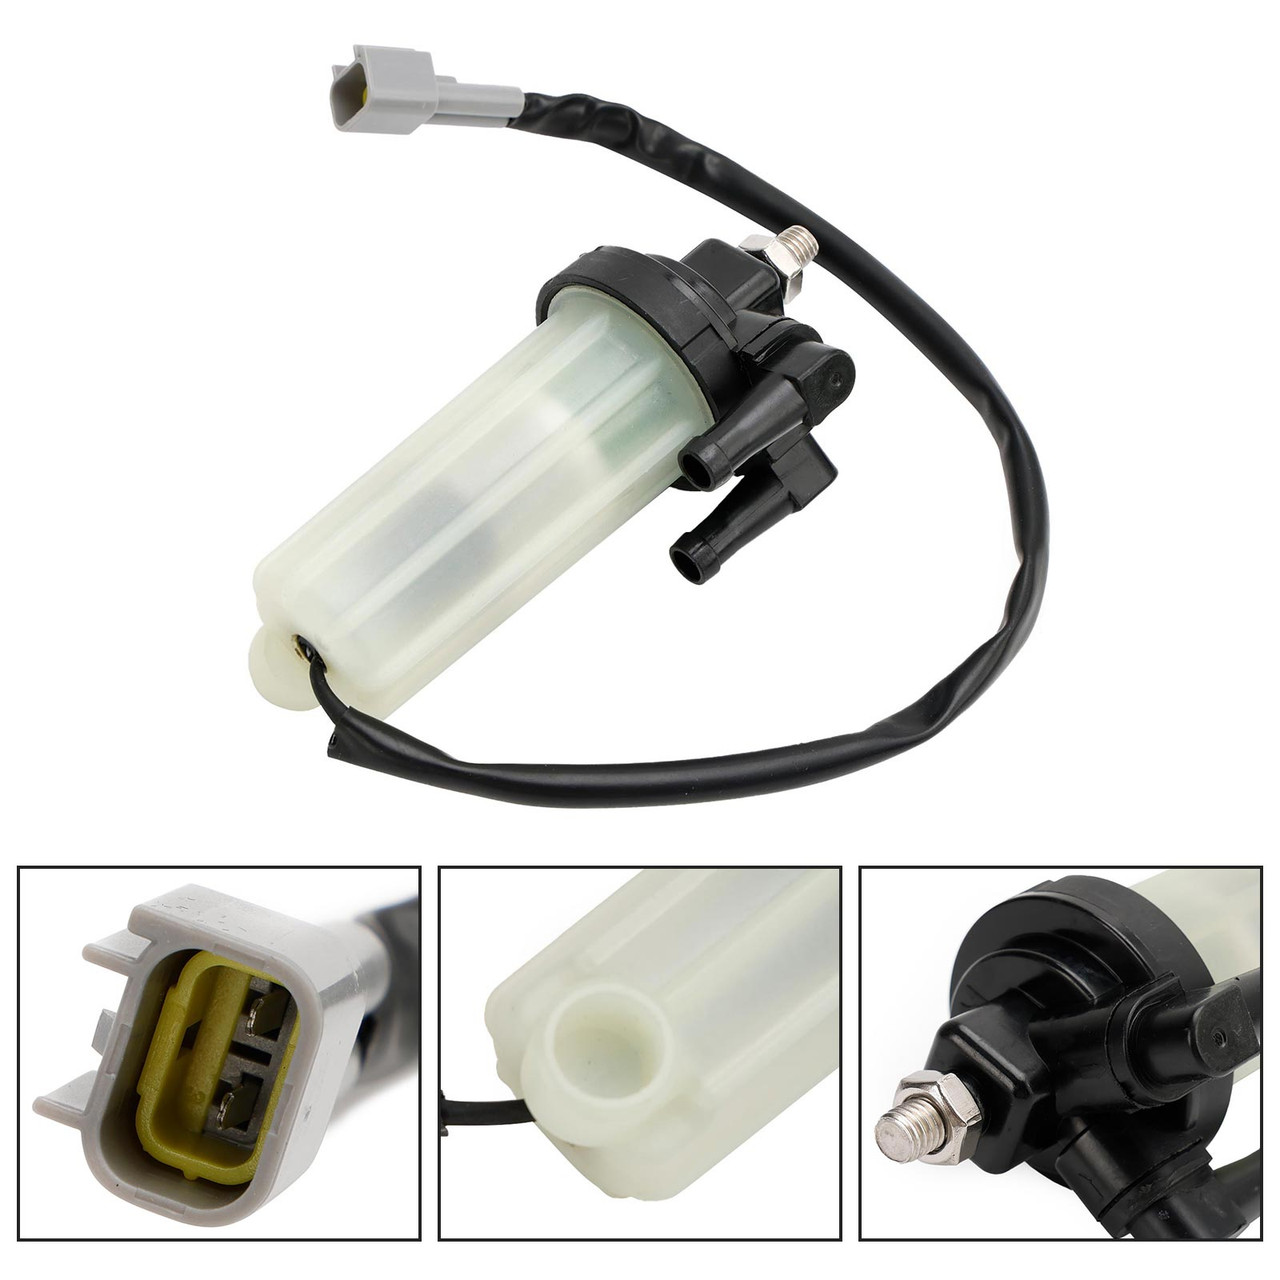 Fuel Filter for Yamaha Outboard 50 60 75 90 100 115 HP 6D8-24560